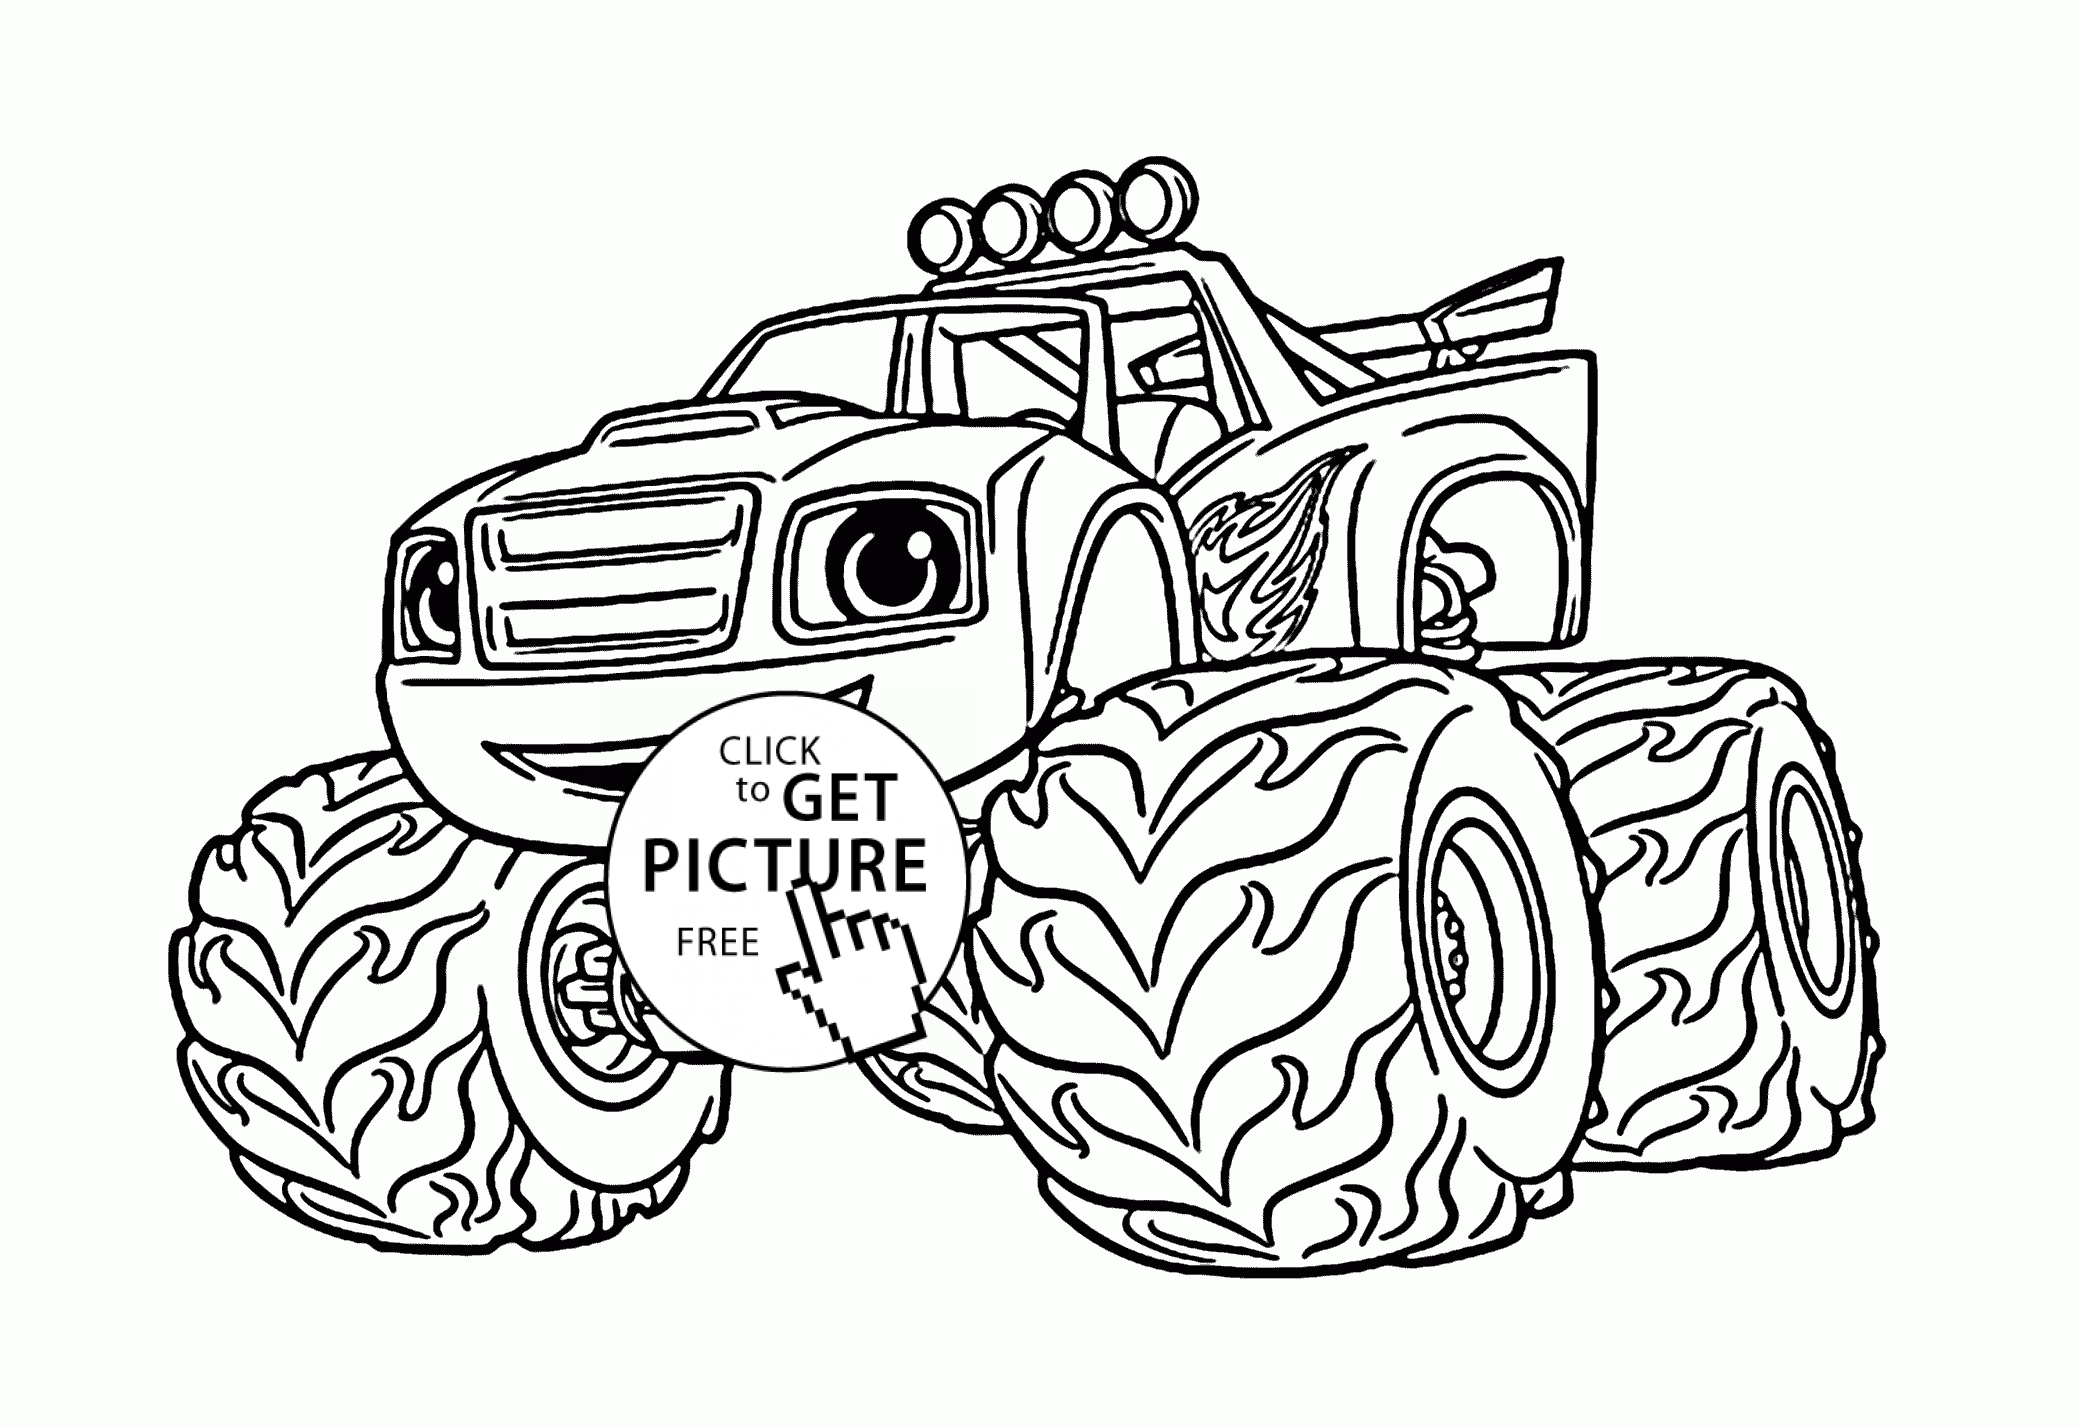 Best Coloring Pages: Coloring Book Amazing Truck Ideas ...